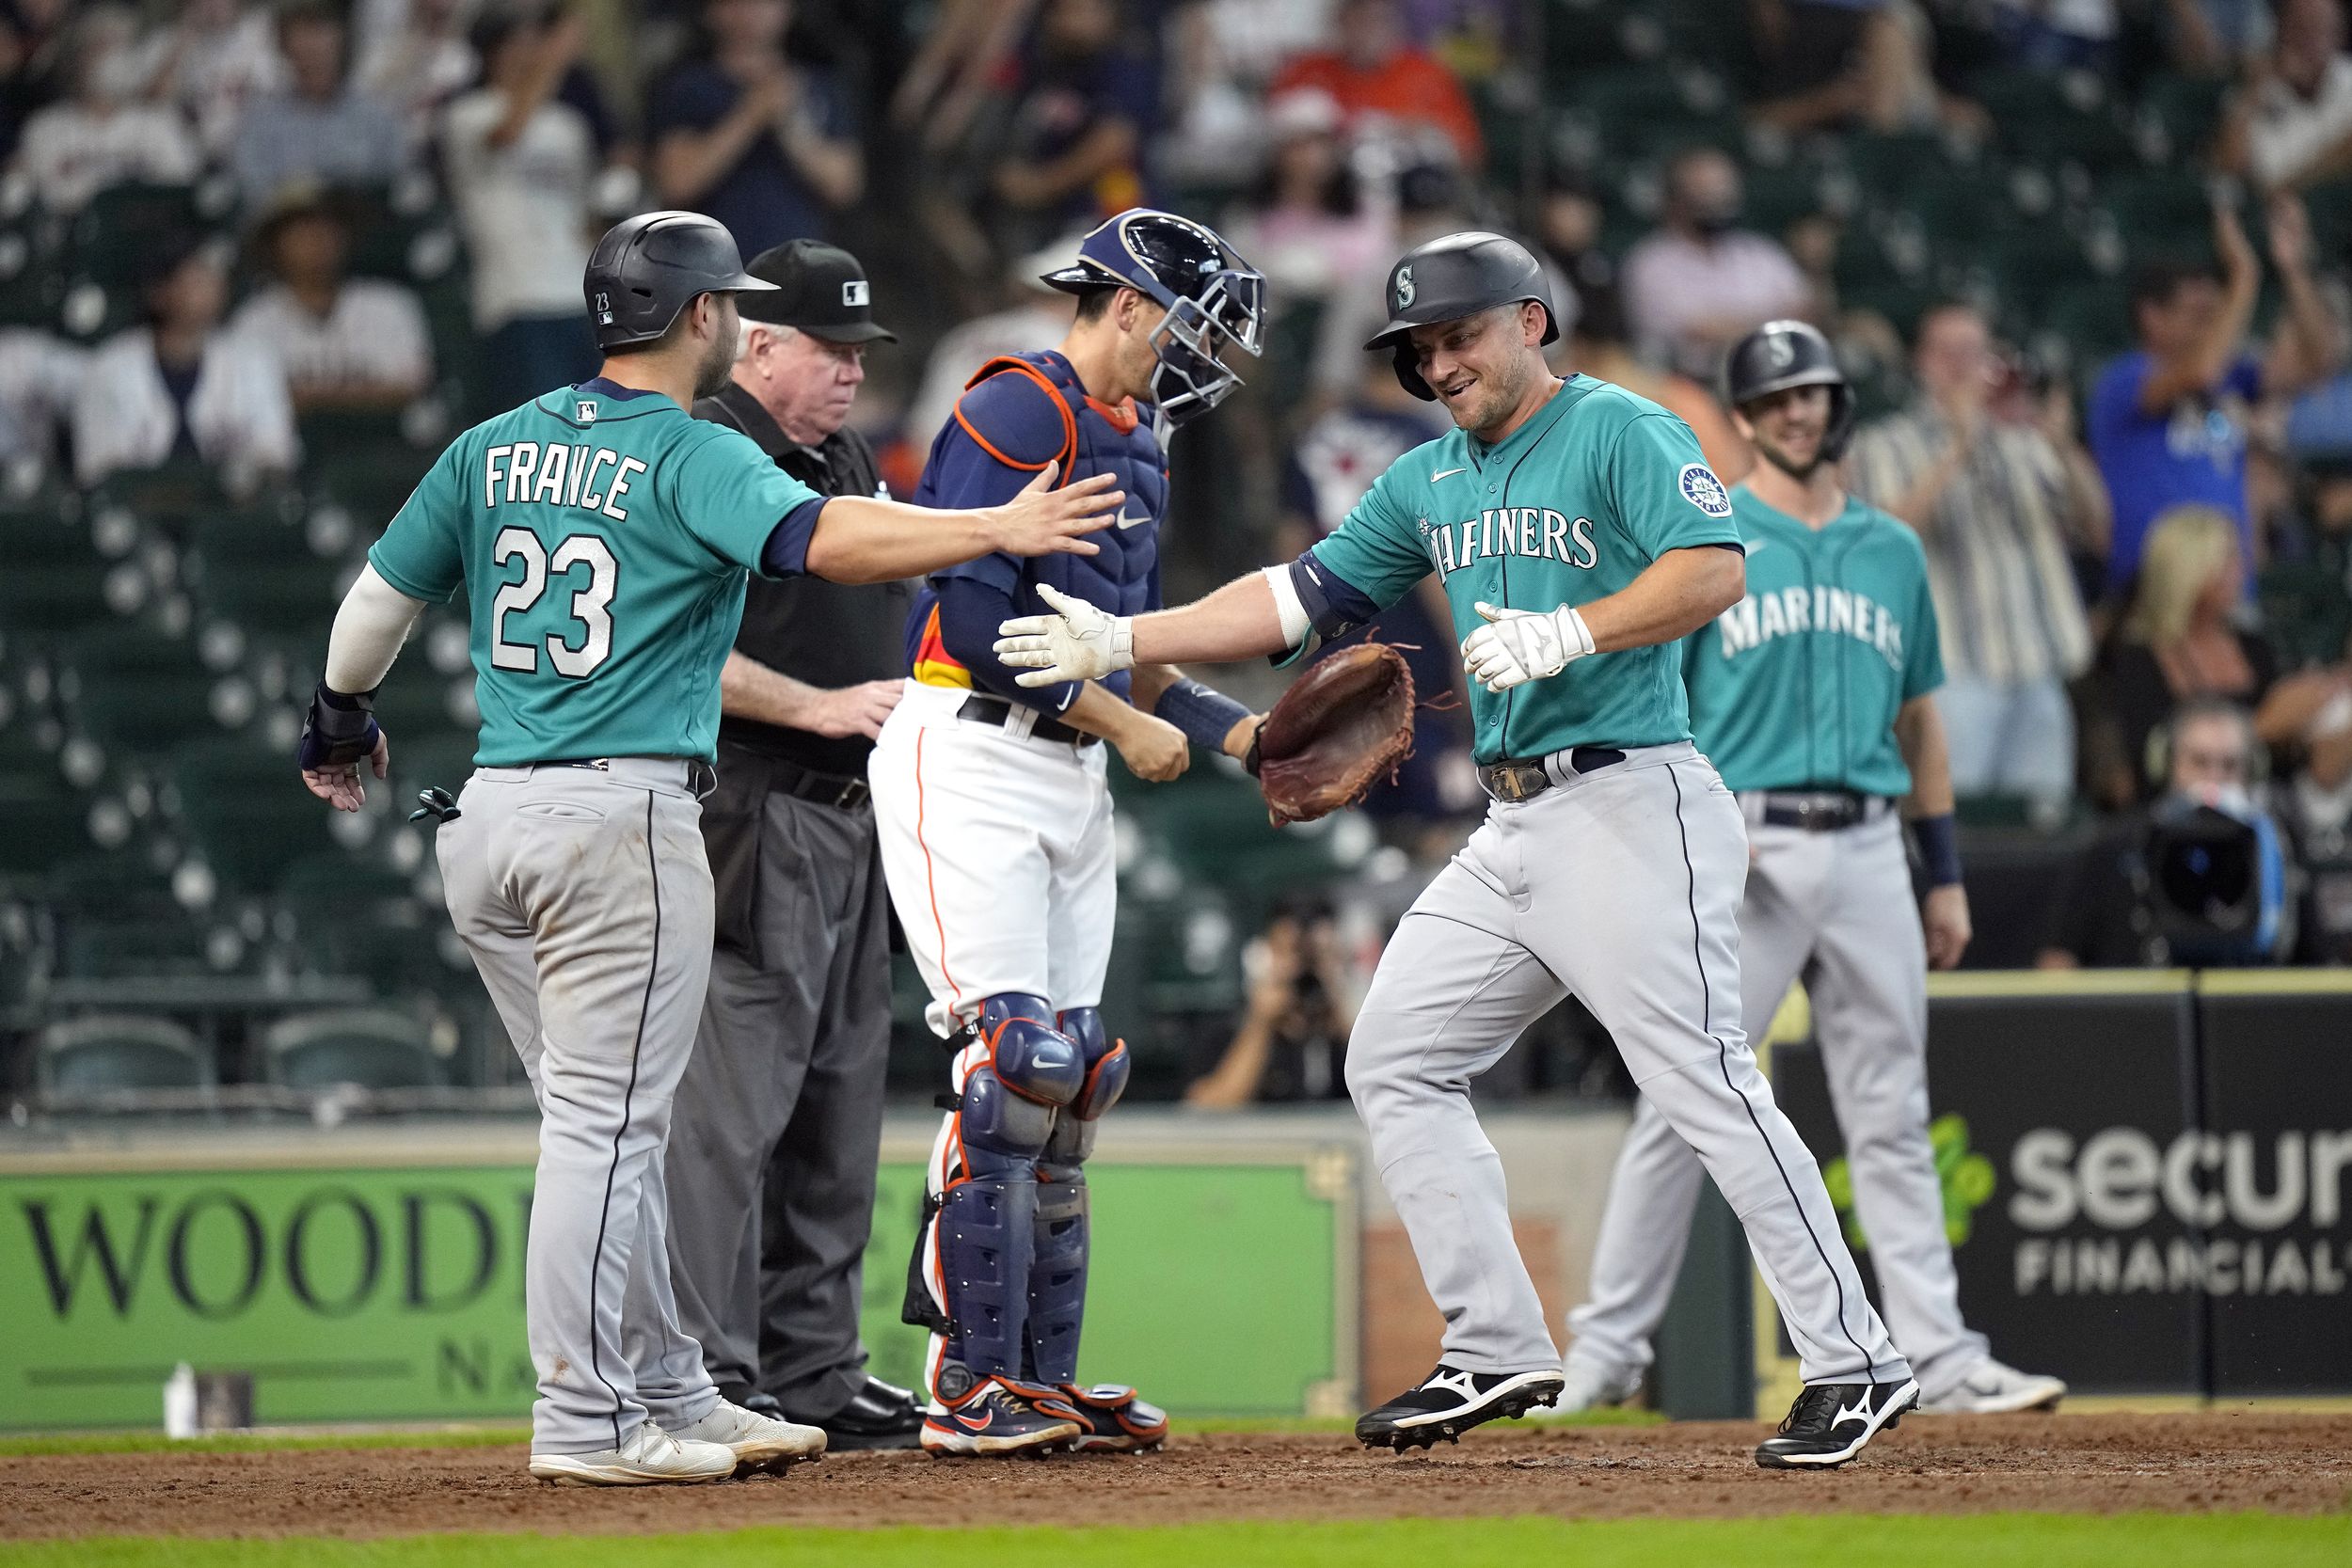 Mariners score 4 in 11th to earn 63 win over Astros The SpokesmanReview